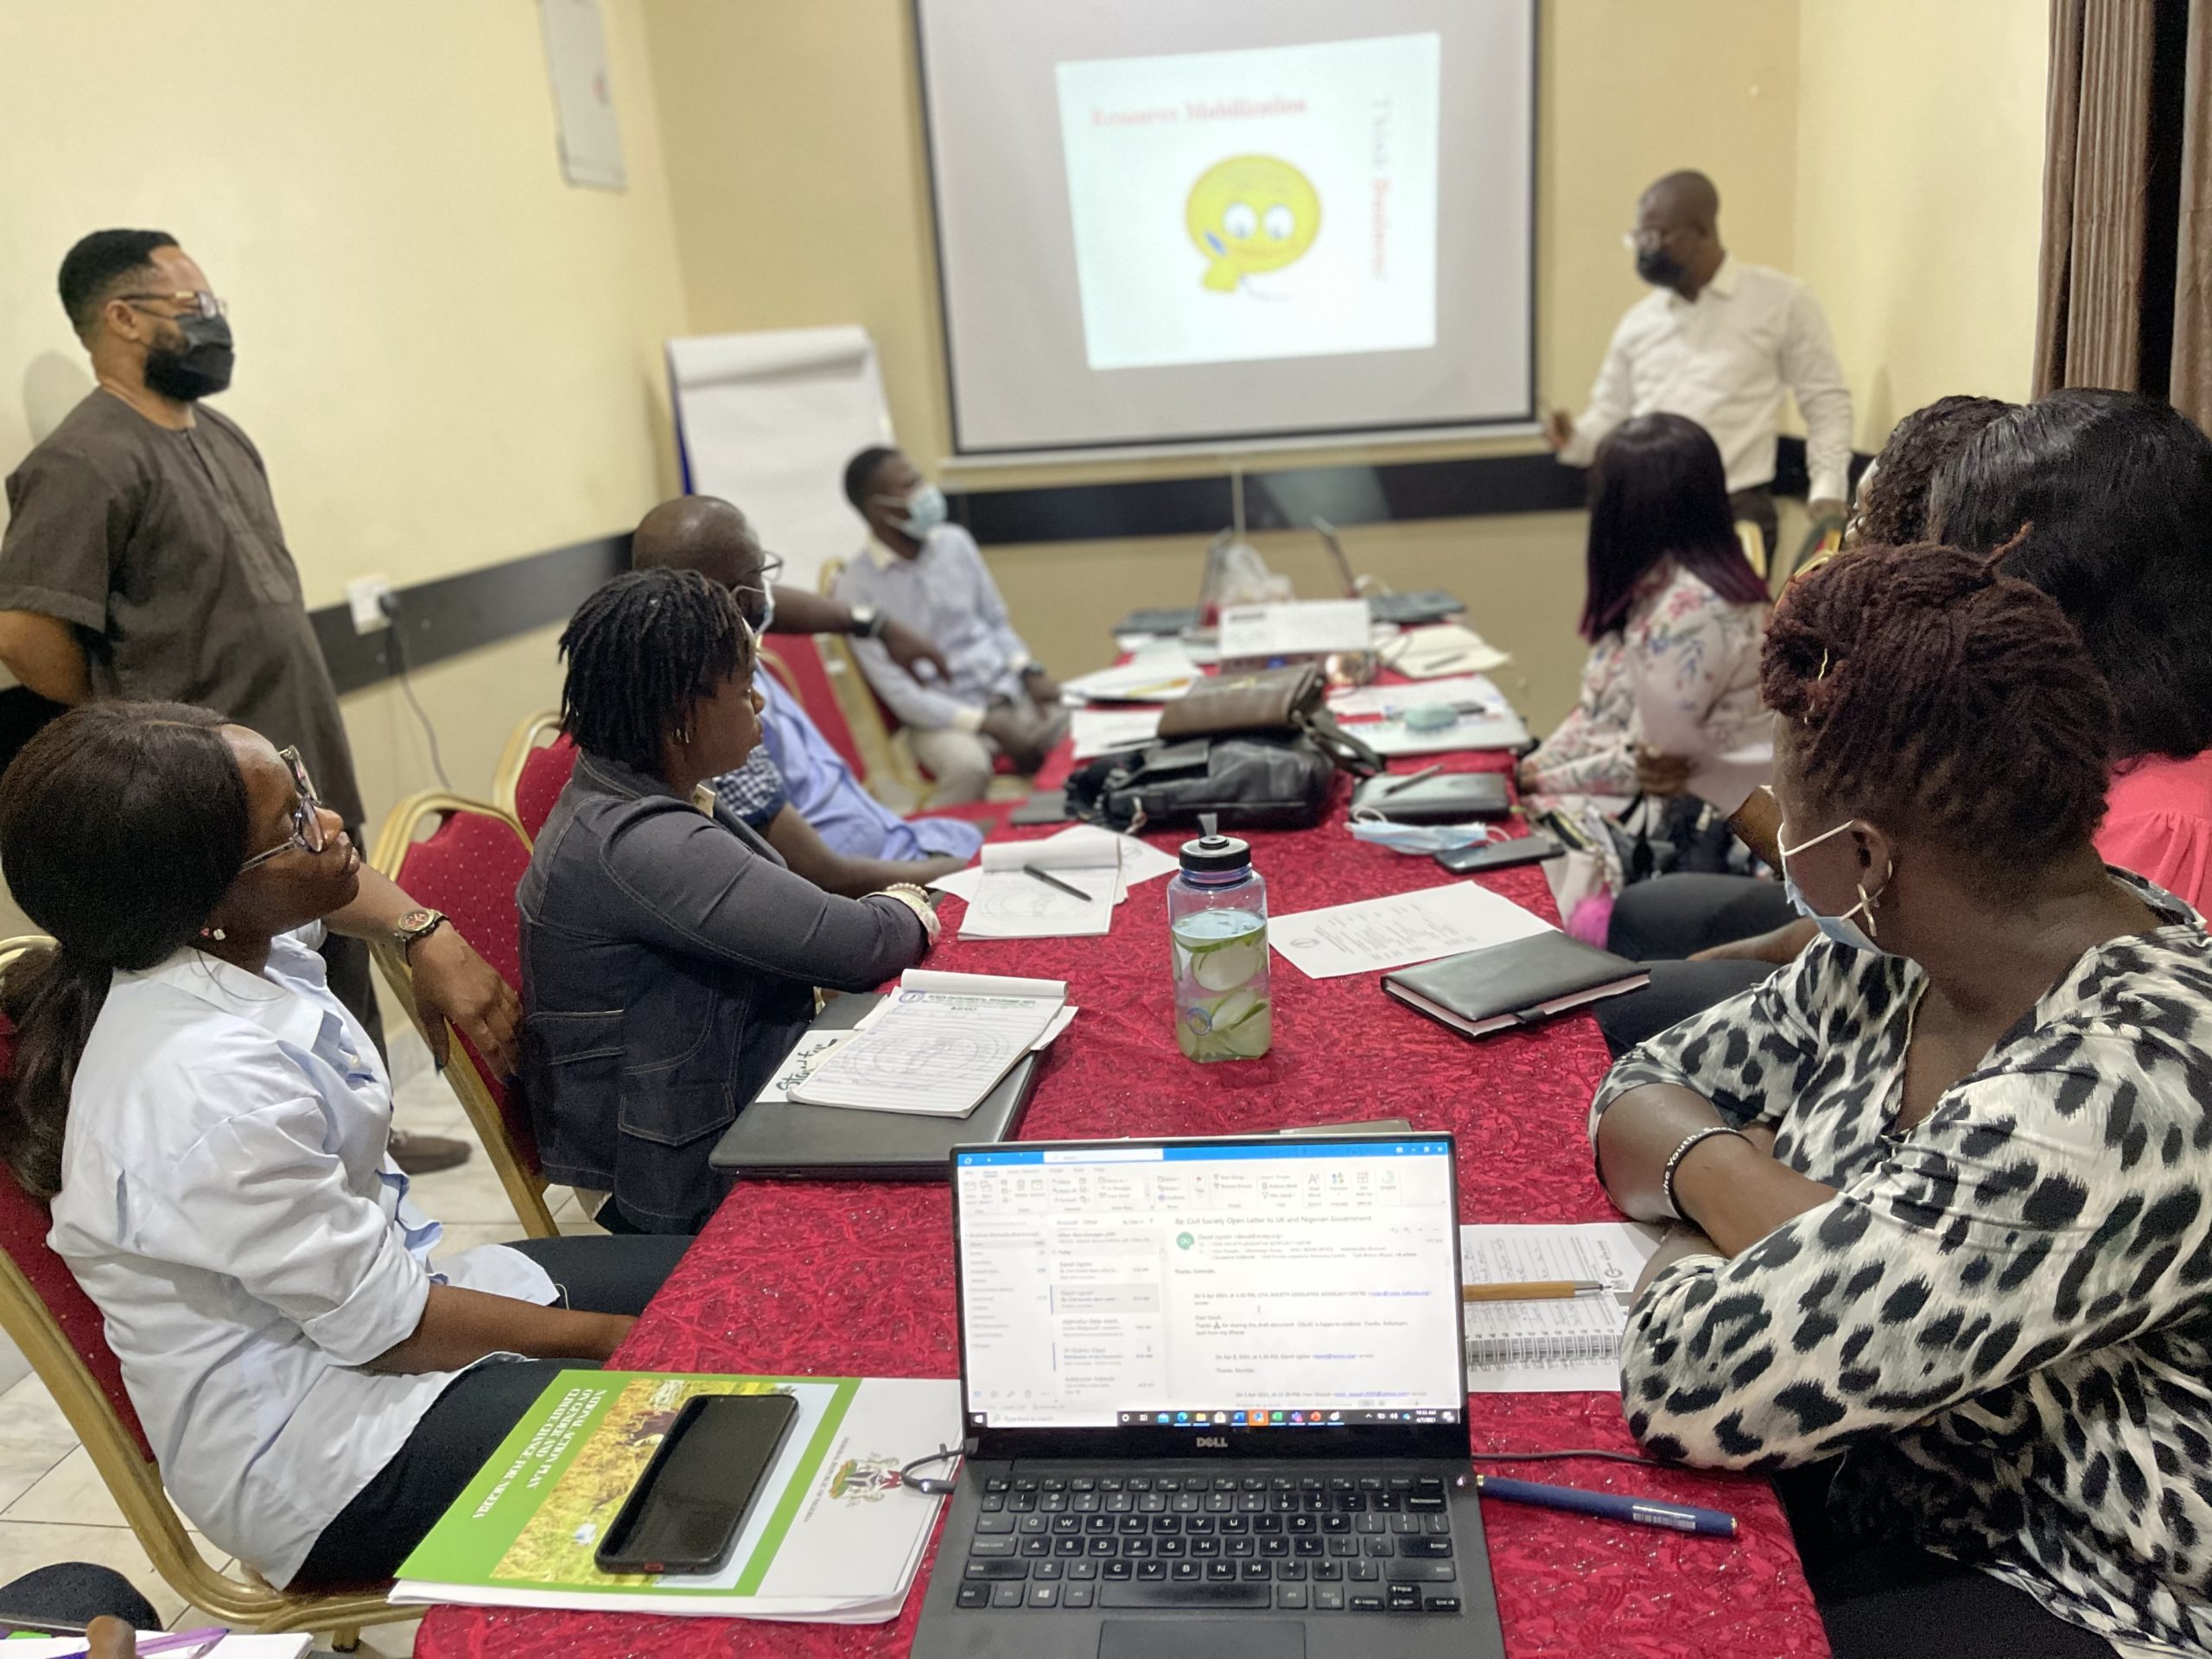 TWO-DAY INTENSIVE CAPACITY BUILDING TRAINING FOR WEP STAFF